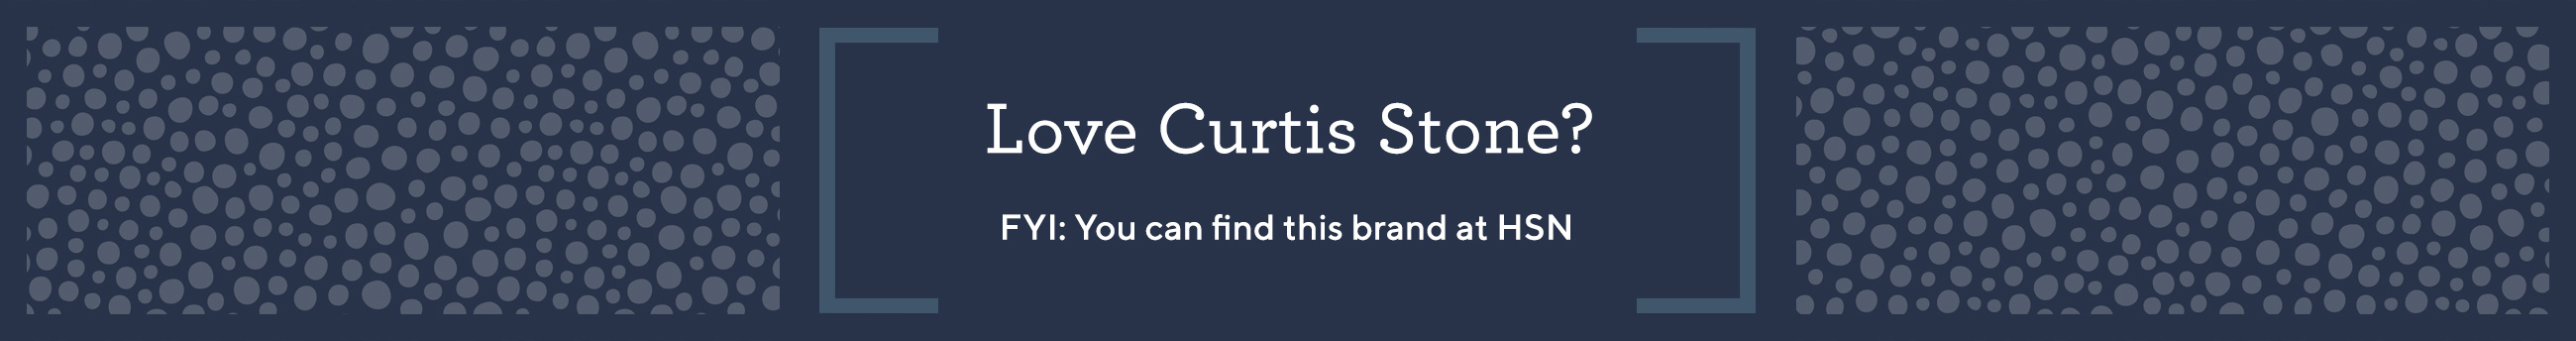 Love Curtis Stone?  FYI: You can find this brand at HSN